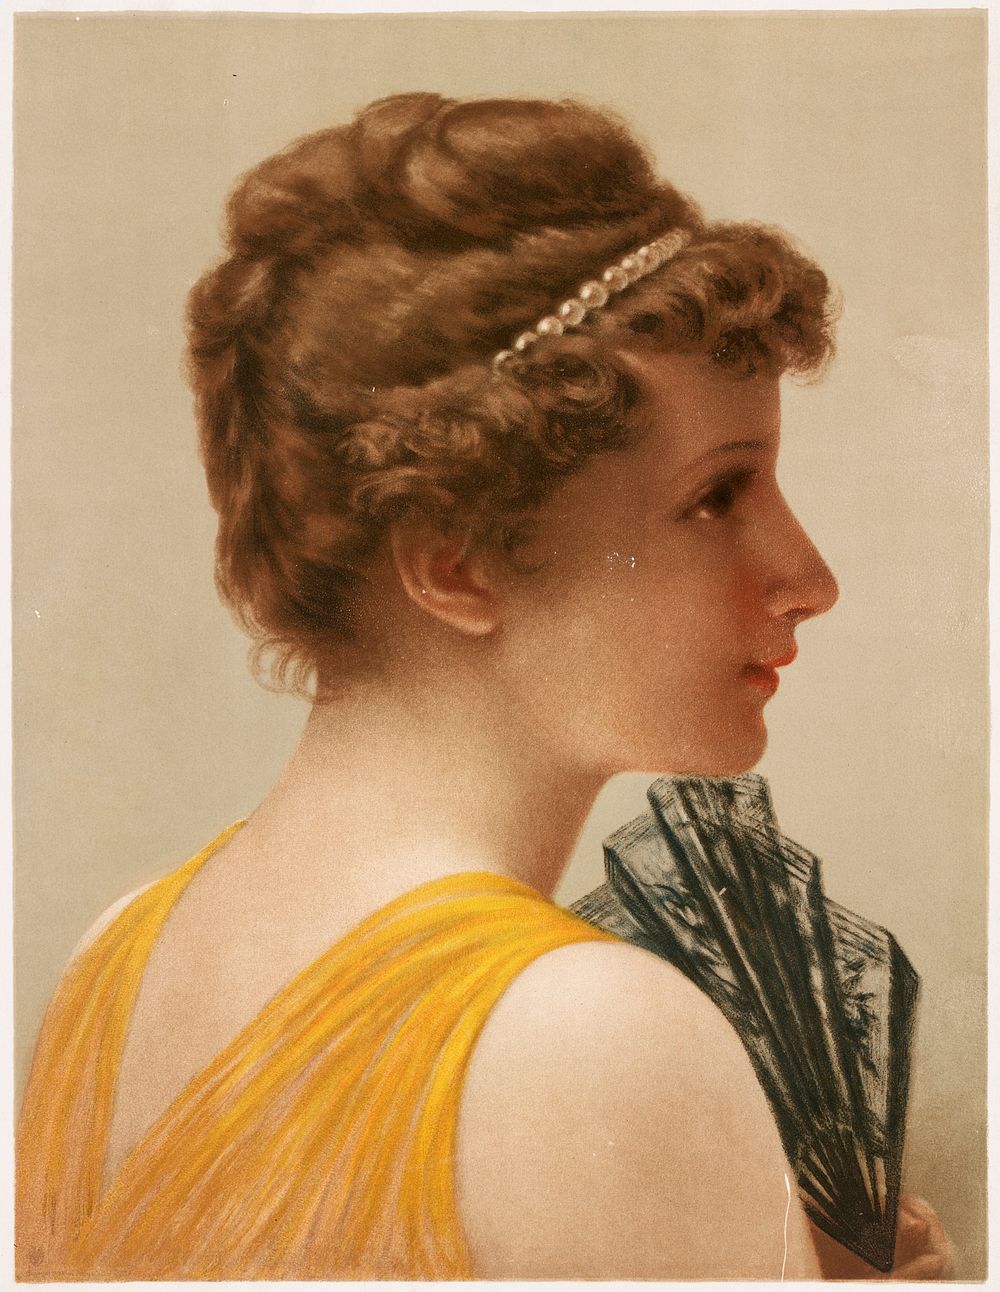             Profile of a woman          